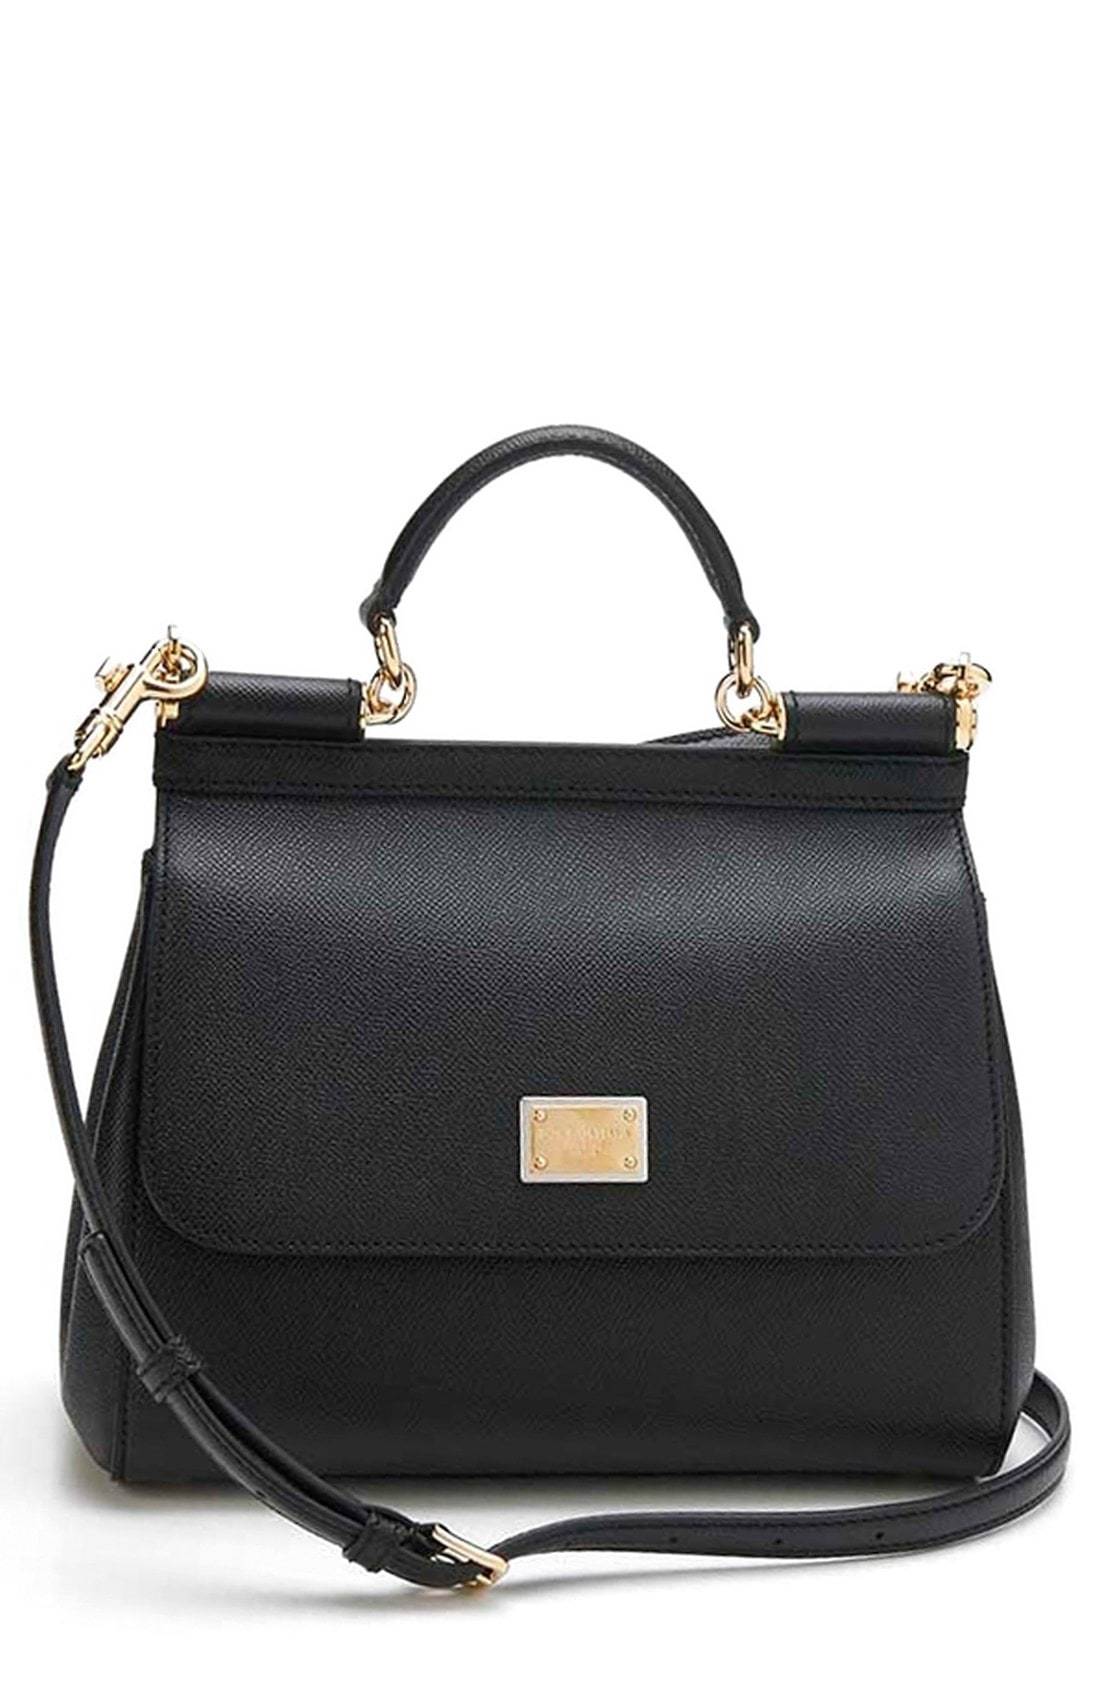 Dolce & Gabbana Small Miss Sicily Leather Satchel, $1,695 | Nordstrom ...